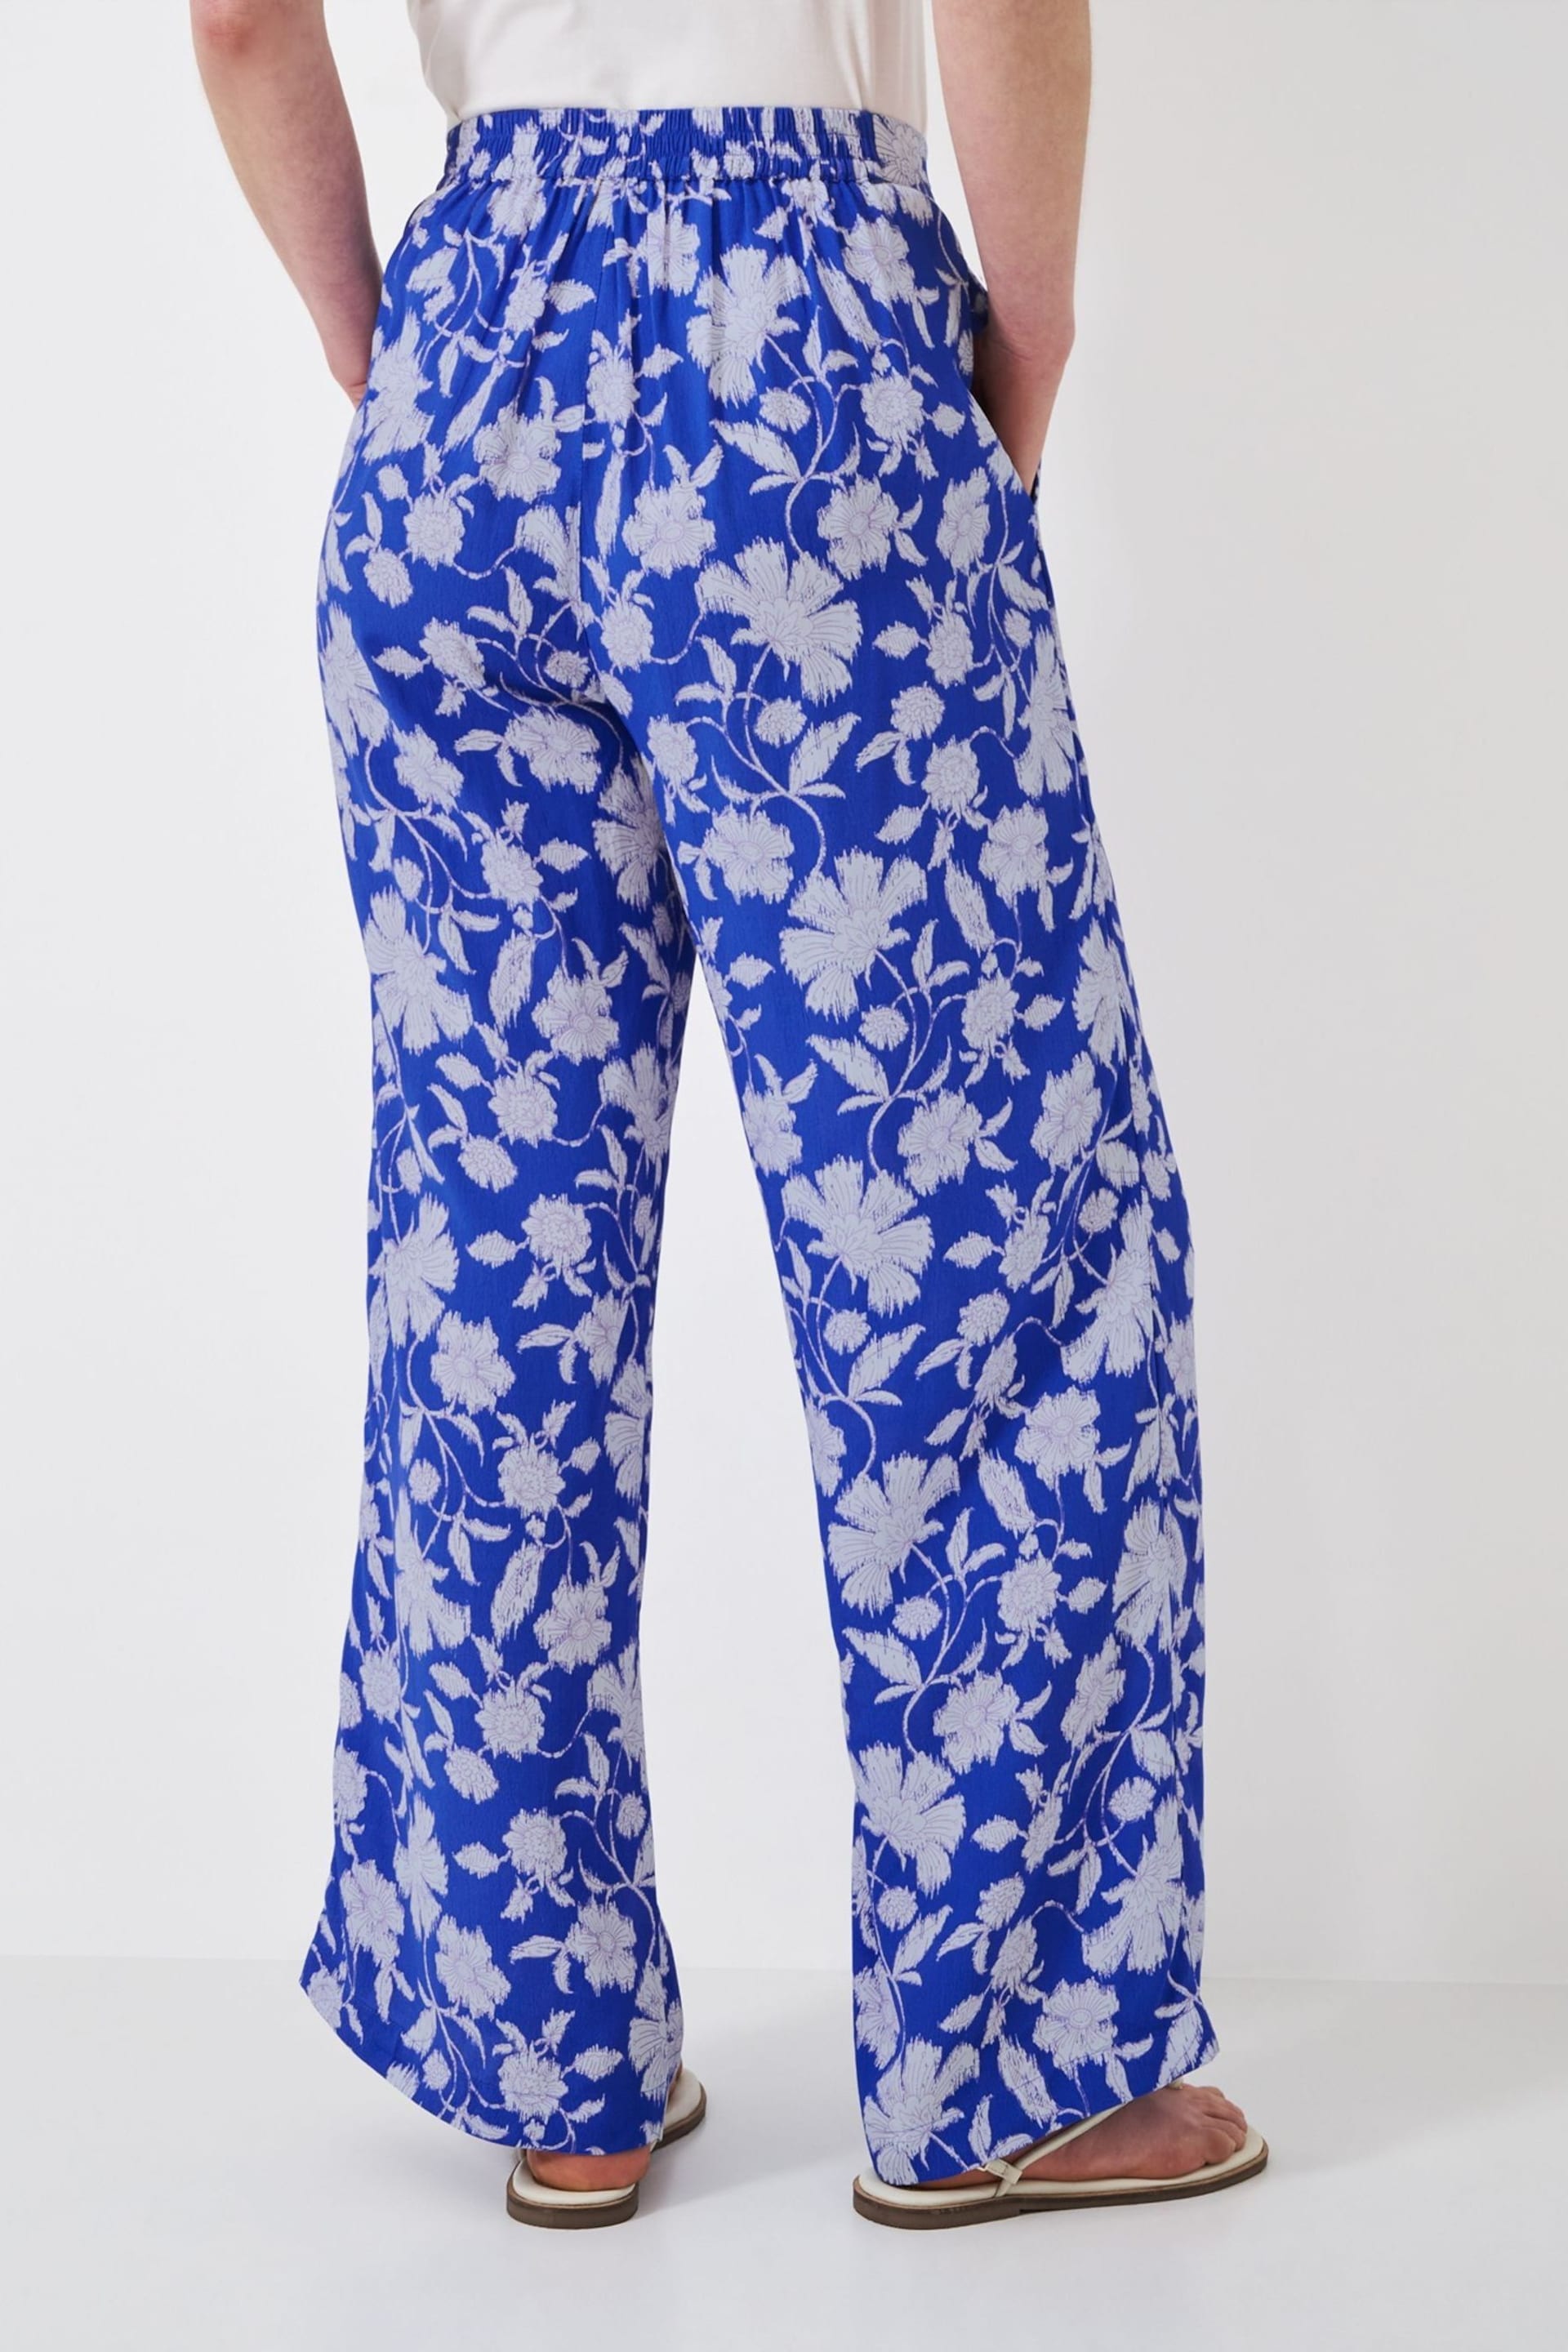 Crew Clothing Company Blue Floral Cotton Relaxed Casual Trousers - Image 2 of 4